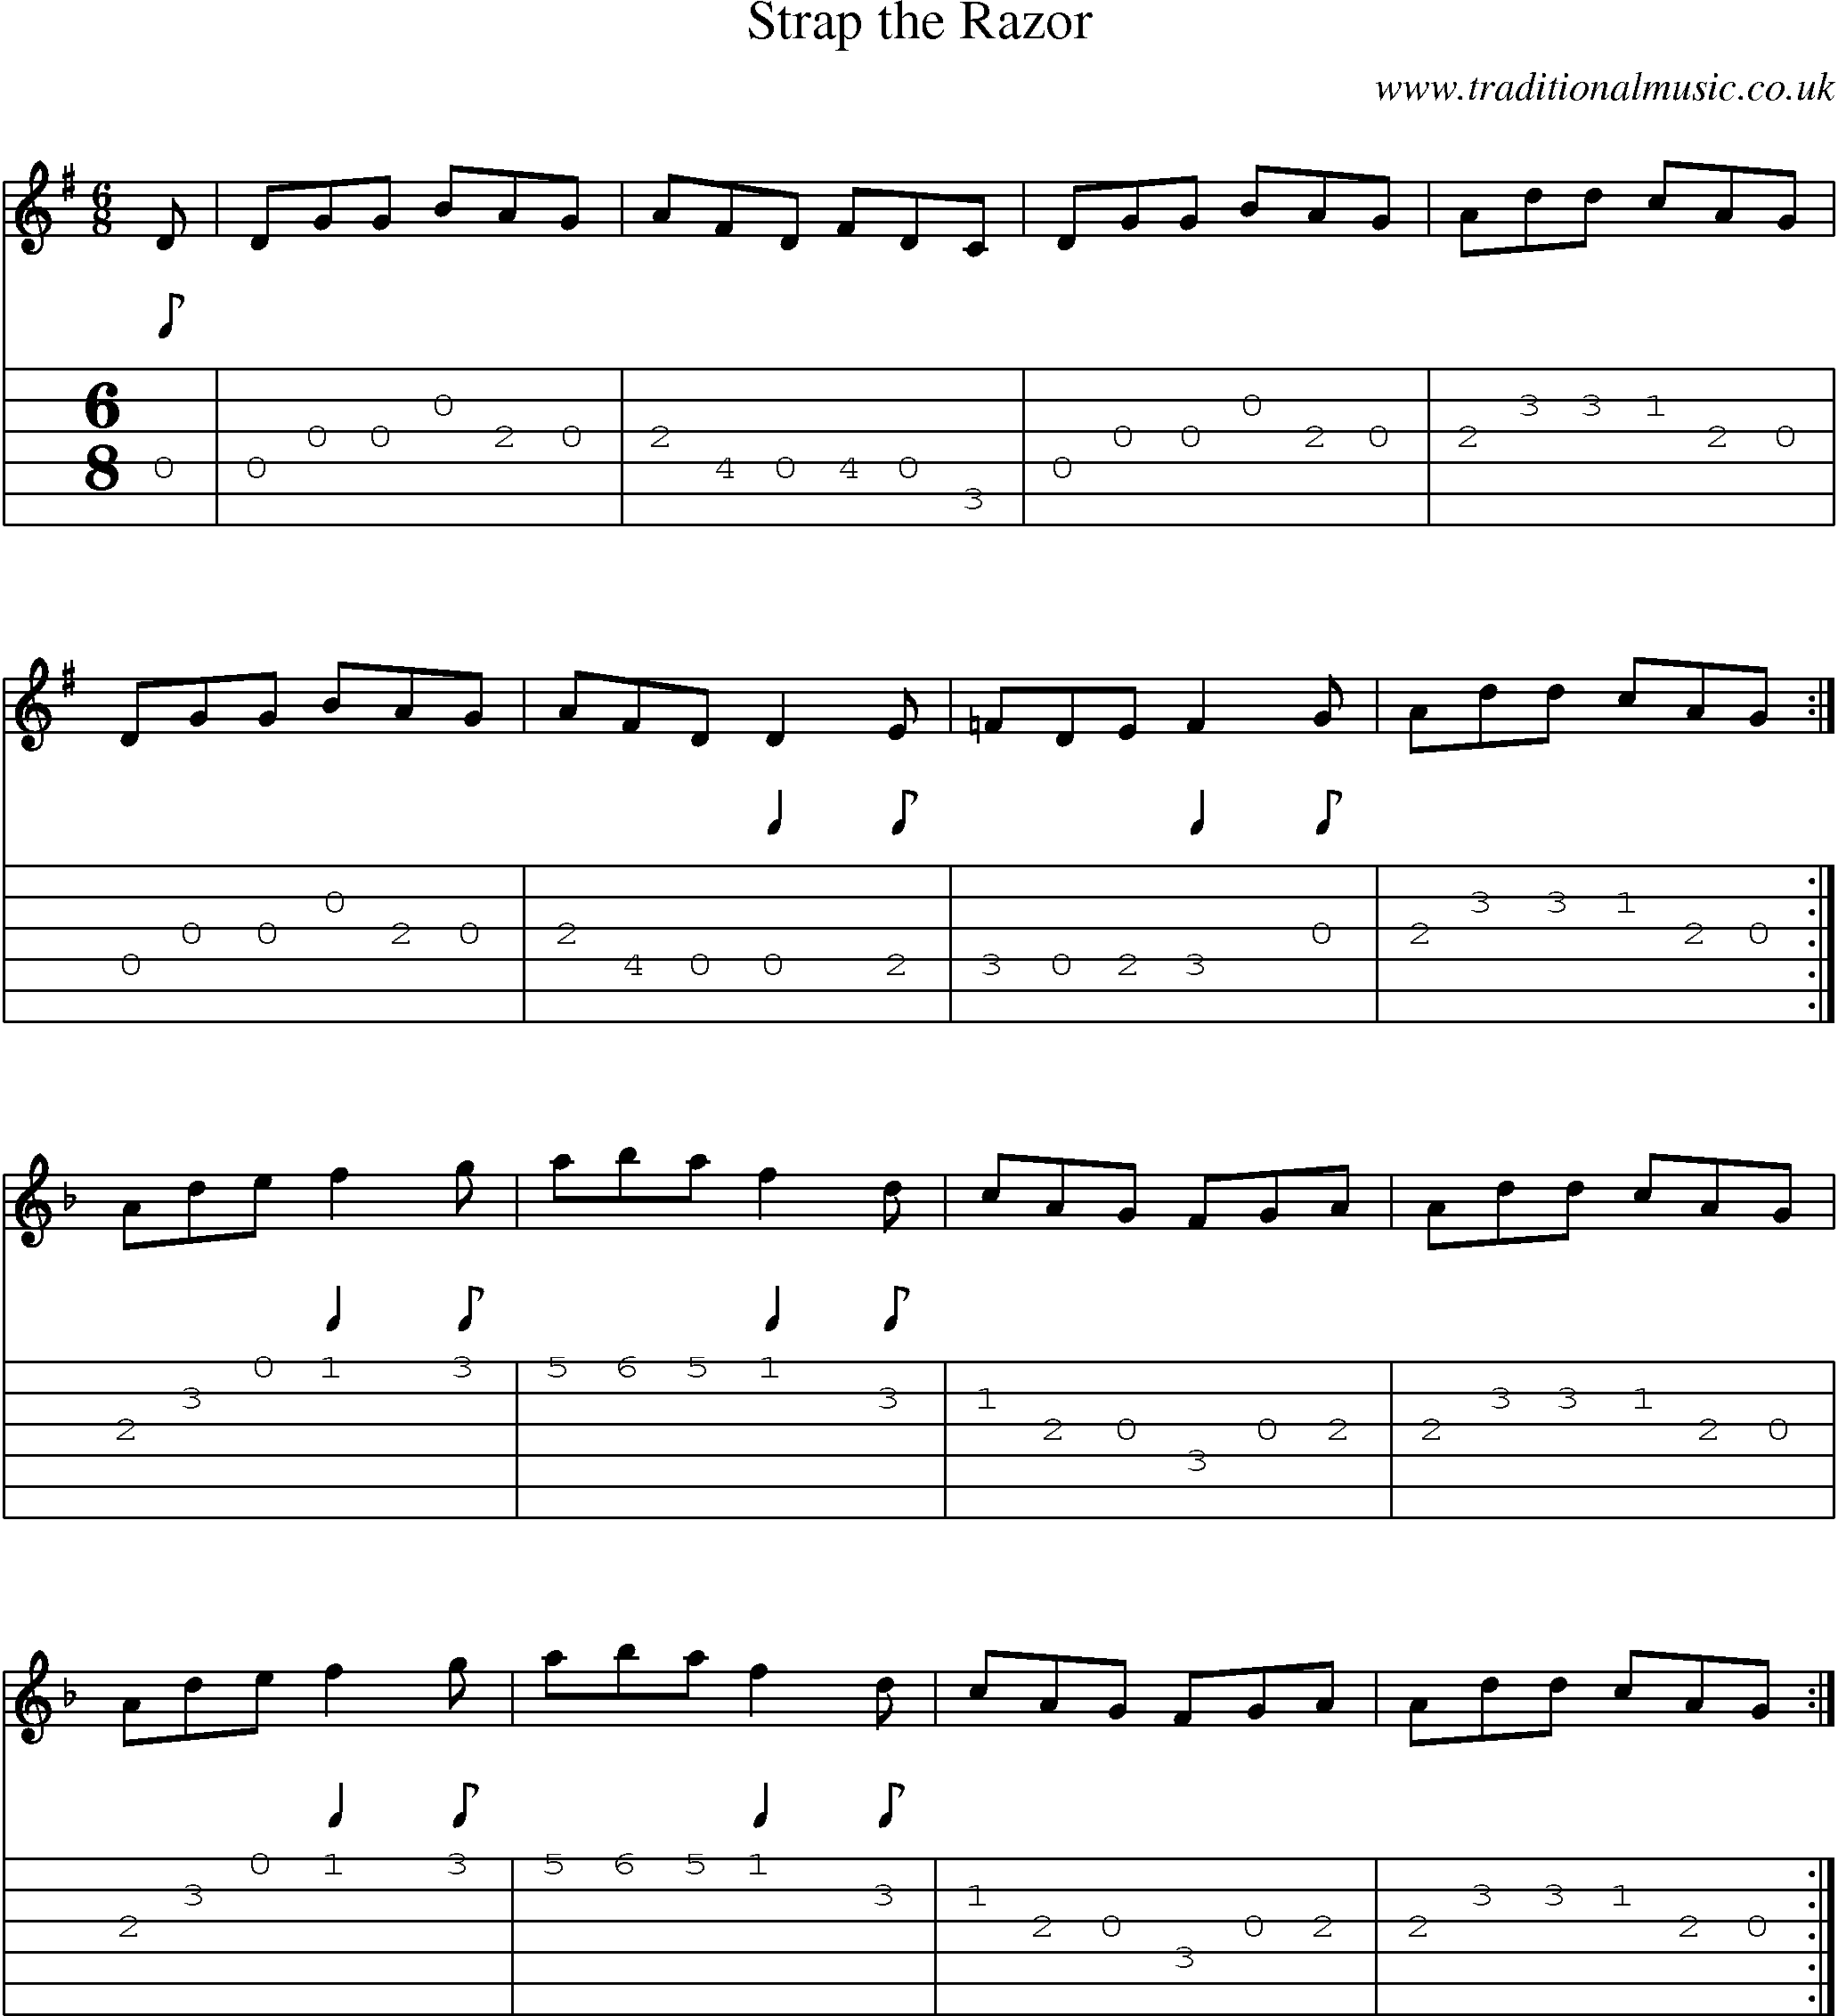 Music Score and Guitar Tabs for Strap Razor